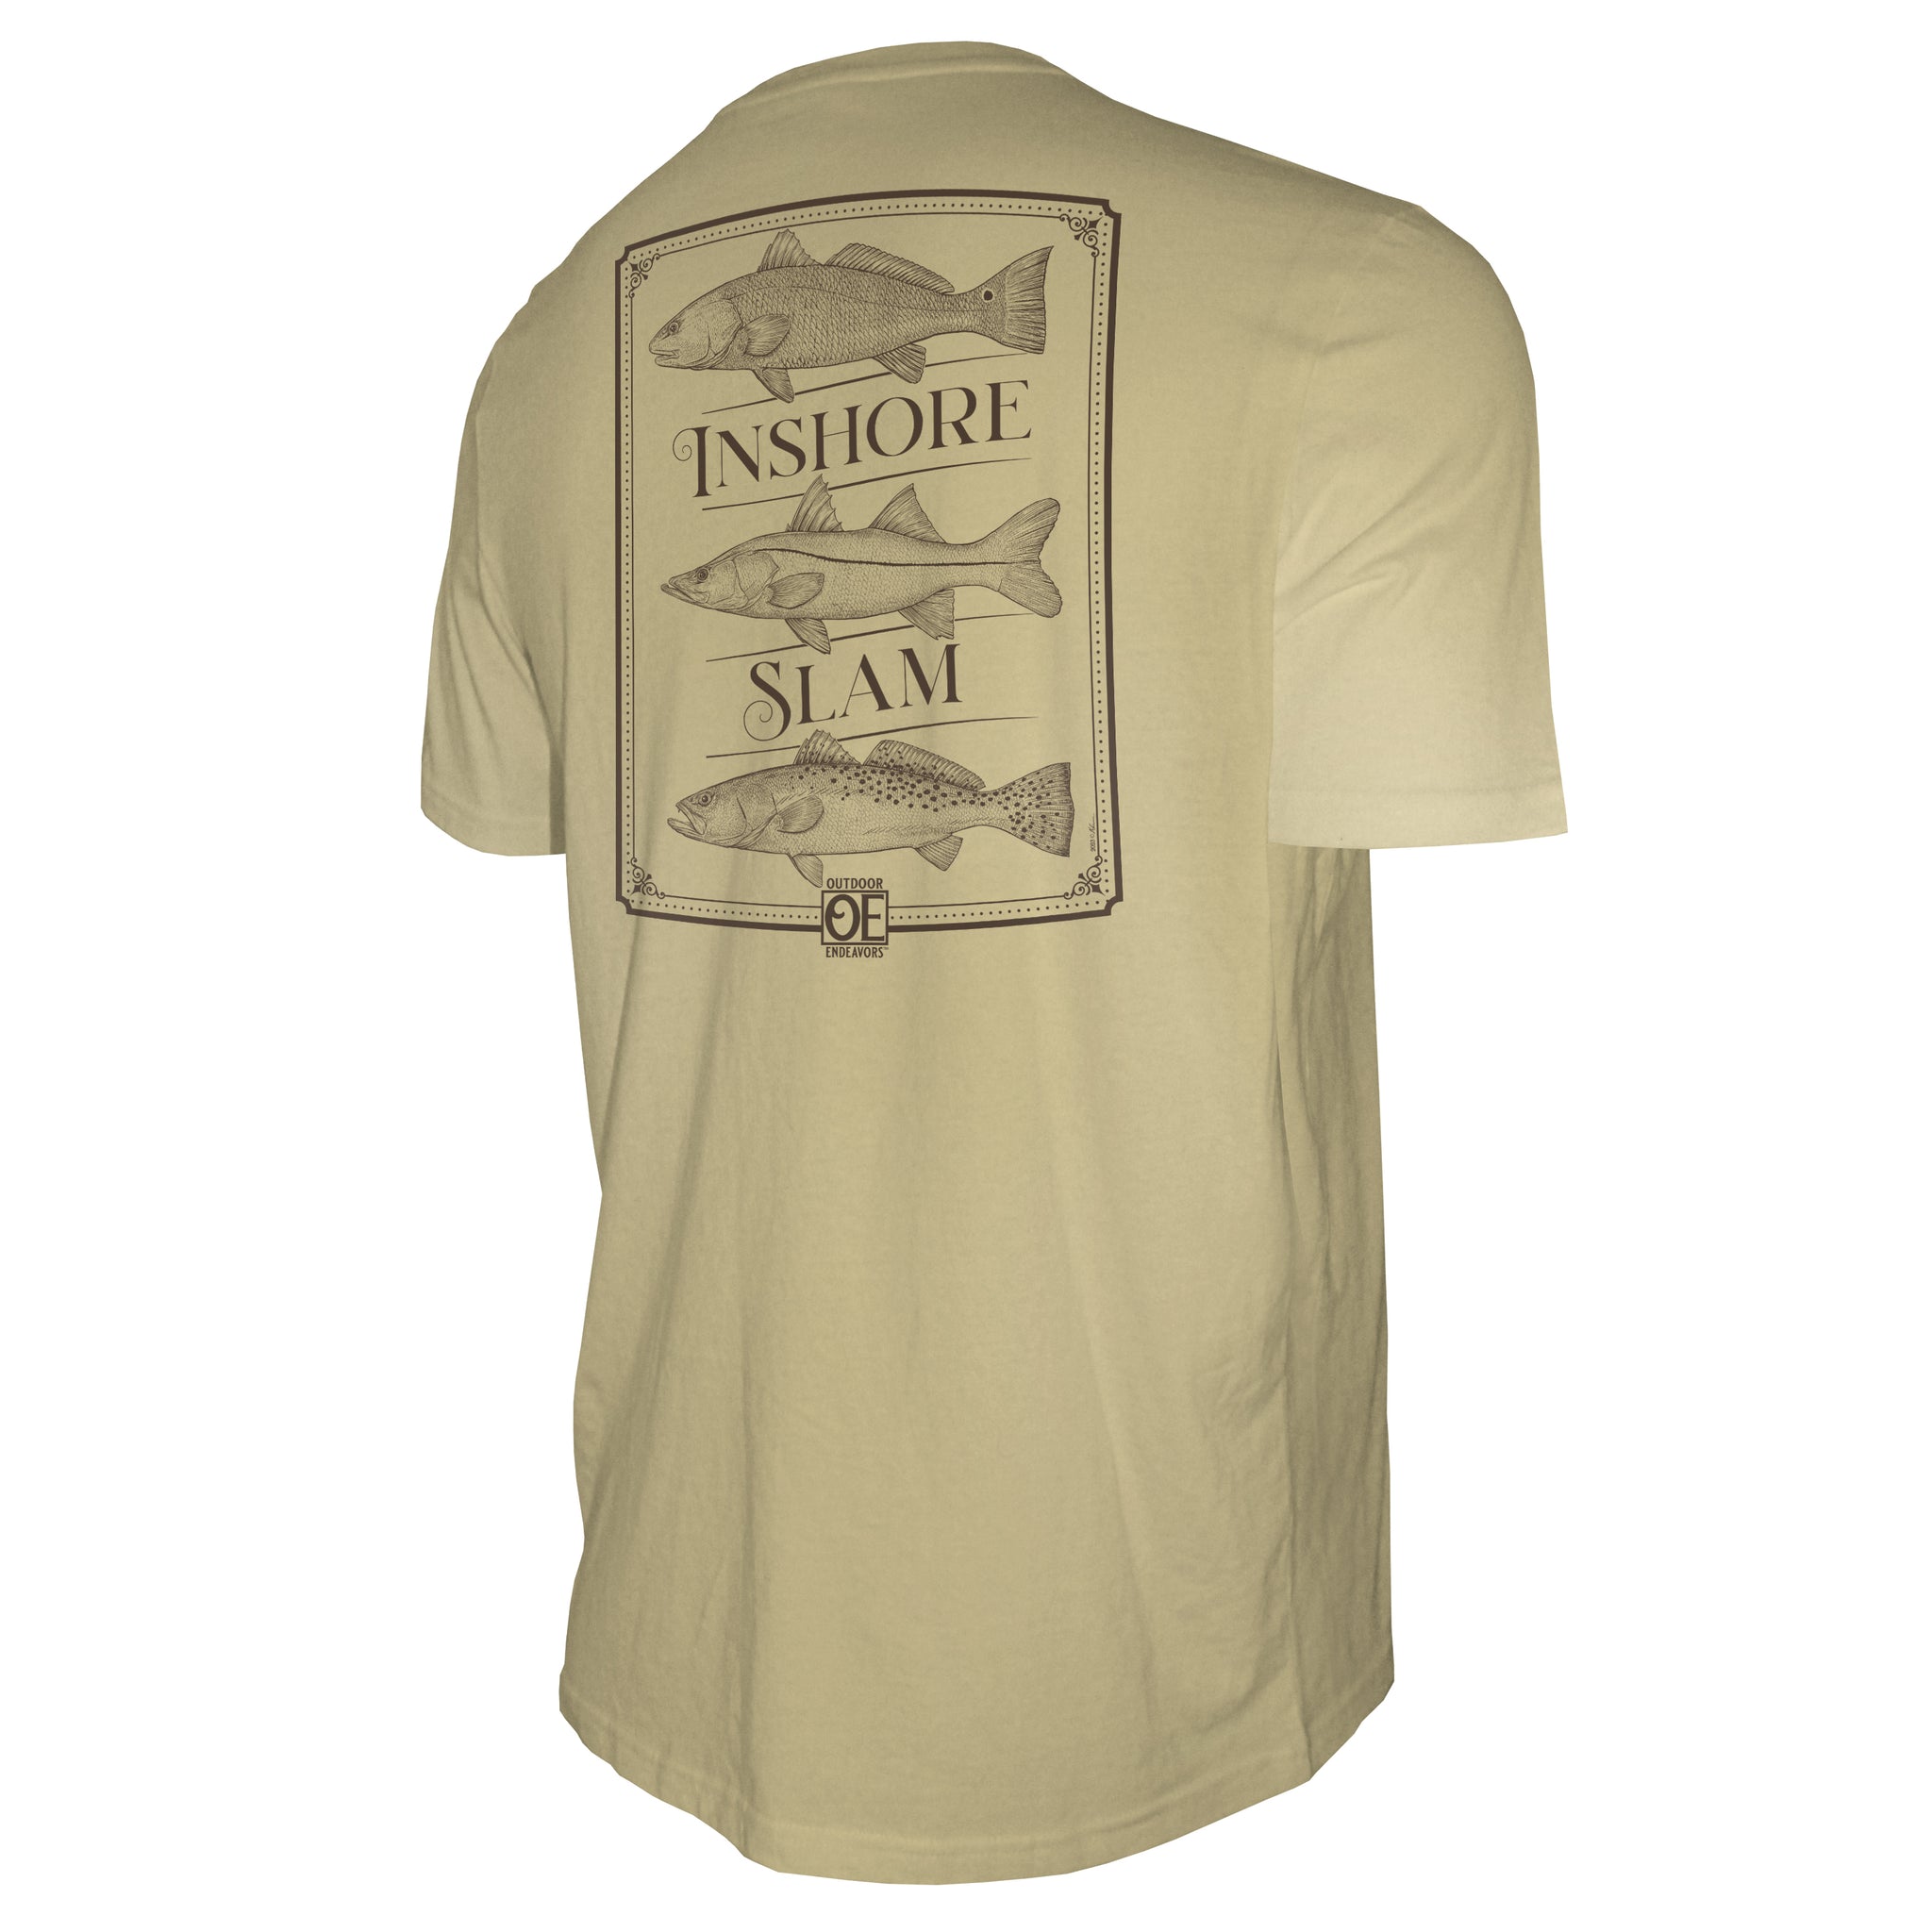 Outdoor Endeavors Classic- American Made Tee - Inshore Slam